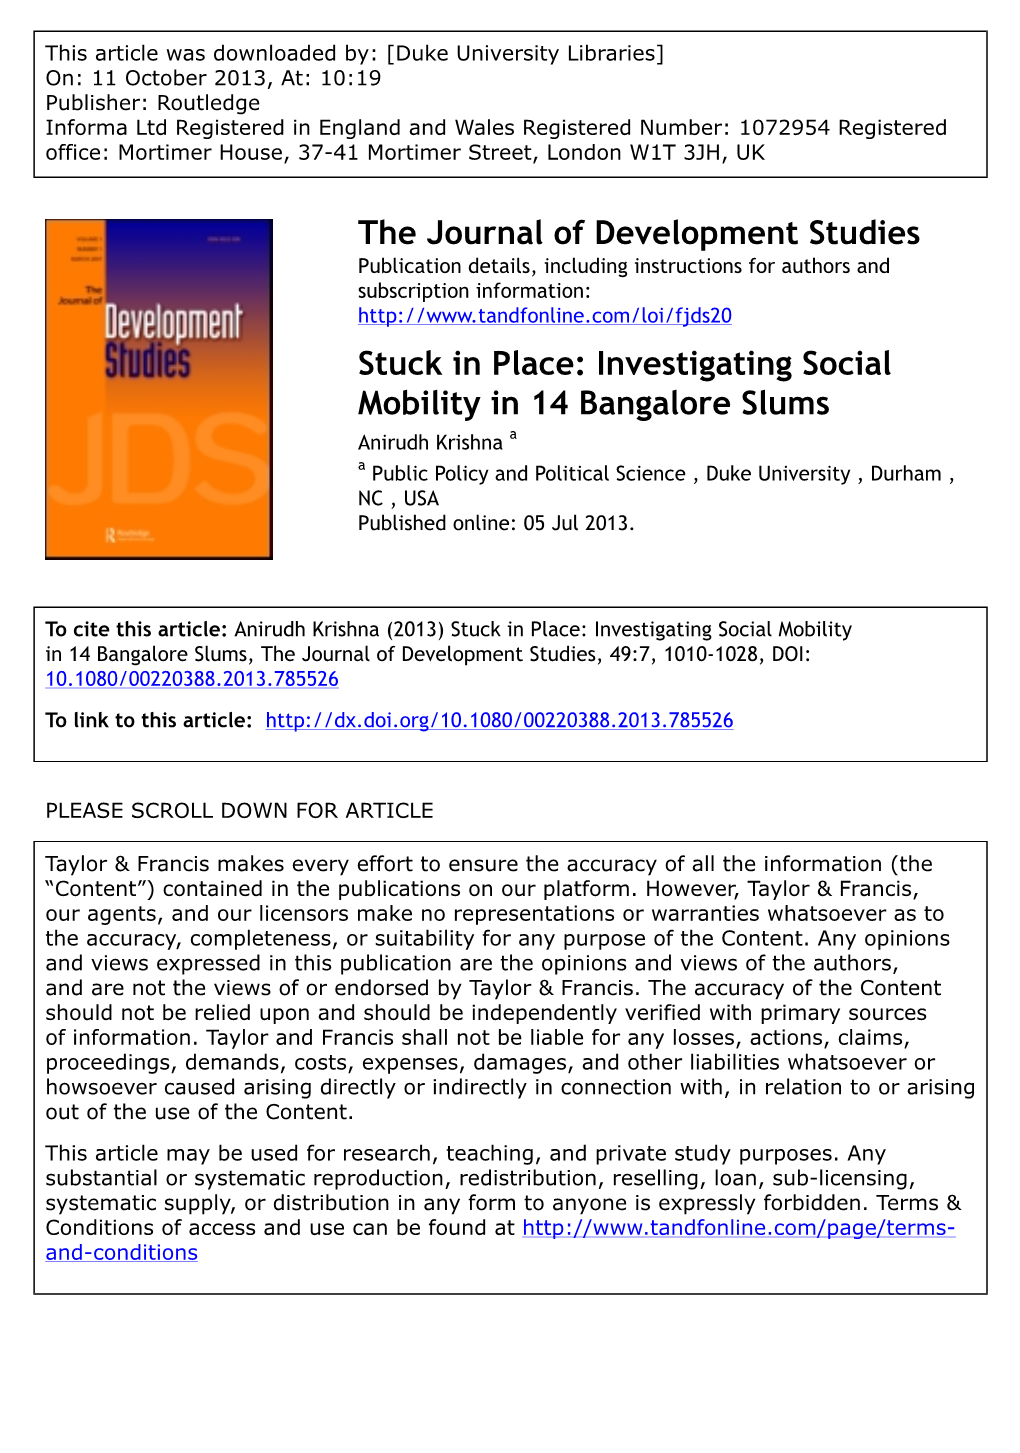 Stuck in Place: Investigating Social Mobility in 14 Bangalore Slums